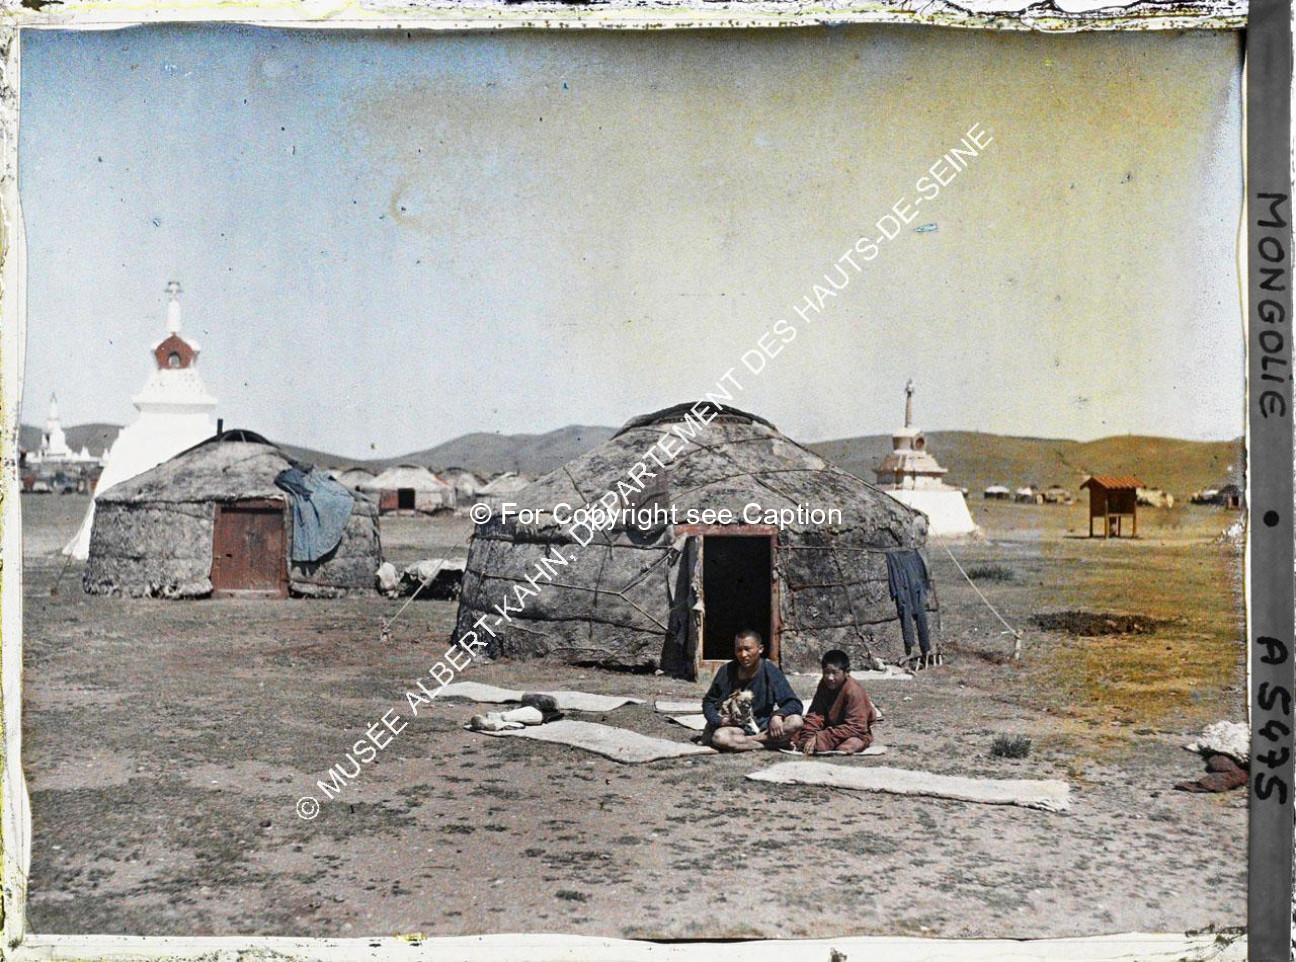 Children in front of yurts and stupas, South-East of Jarankhashar stupa. Musée Albert-Kahn. A5475. P